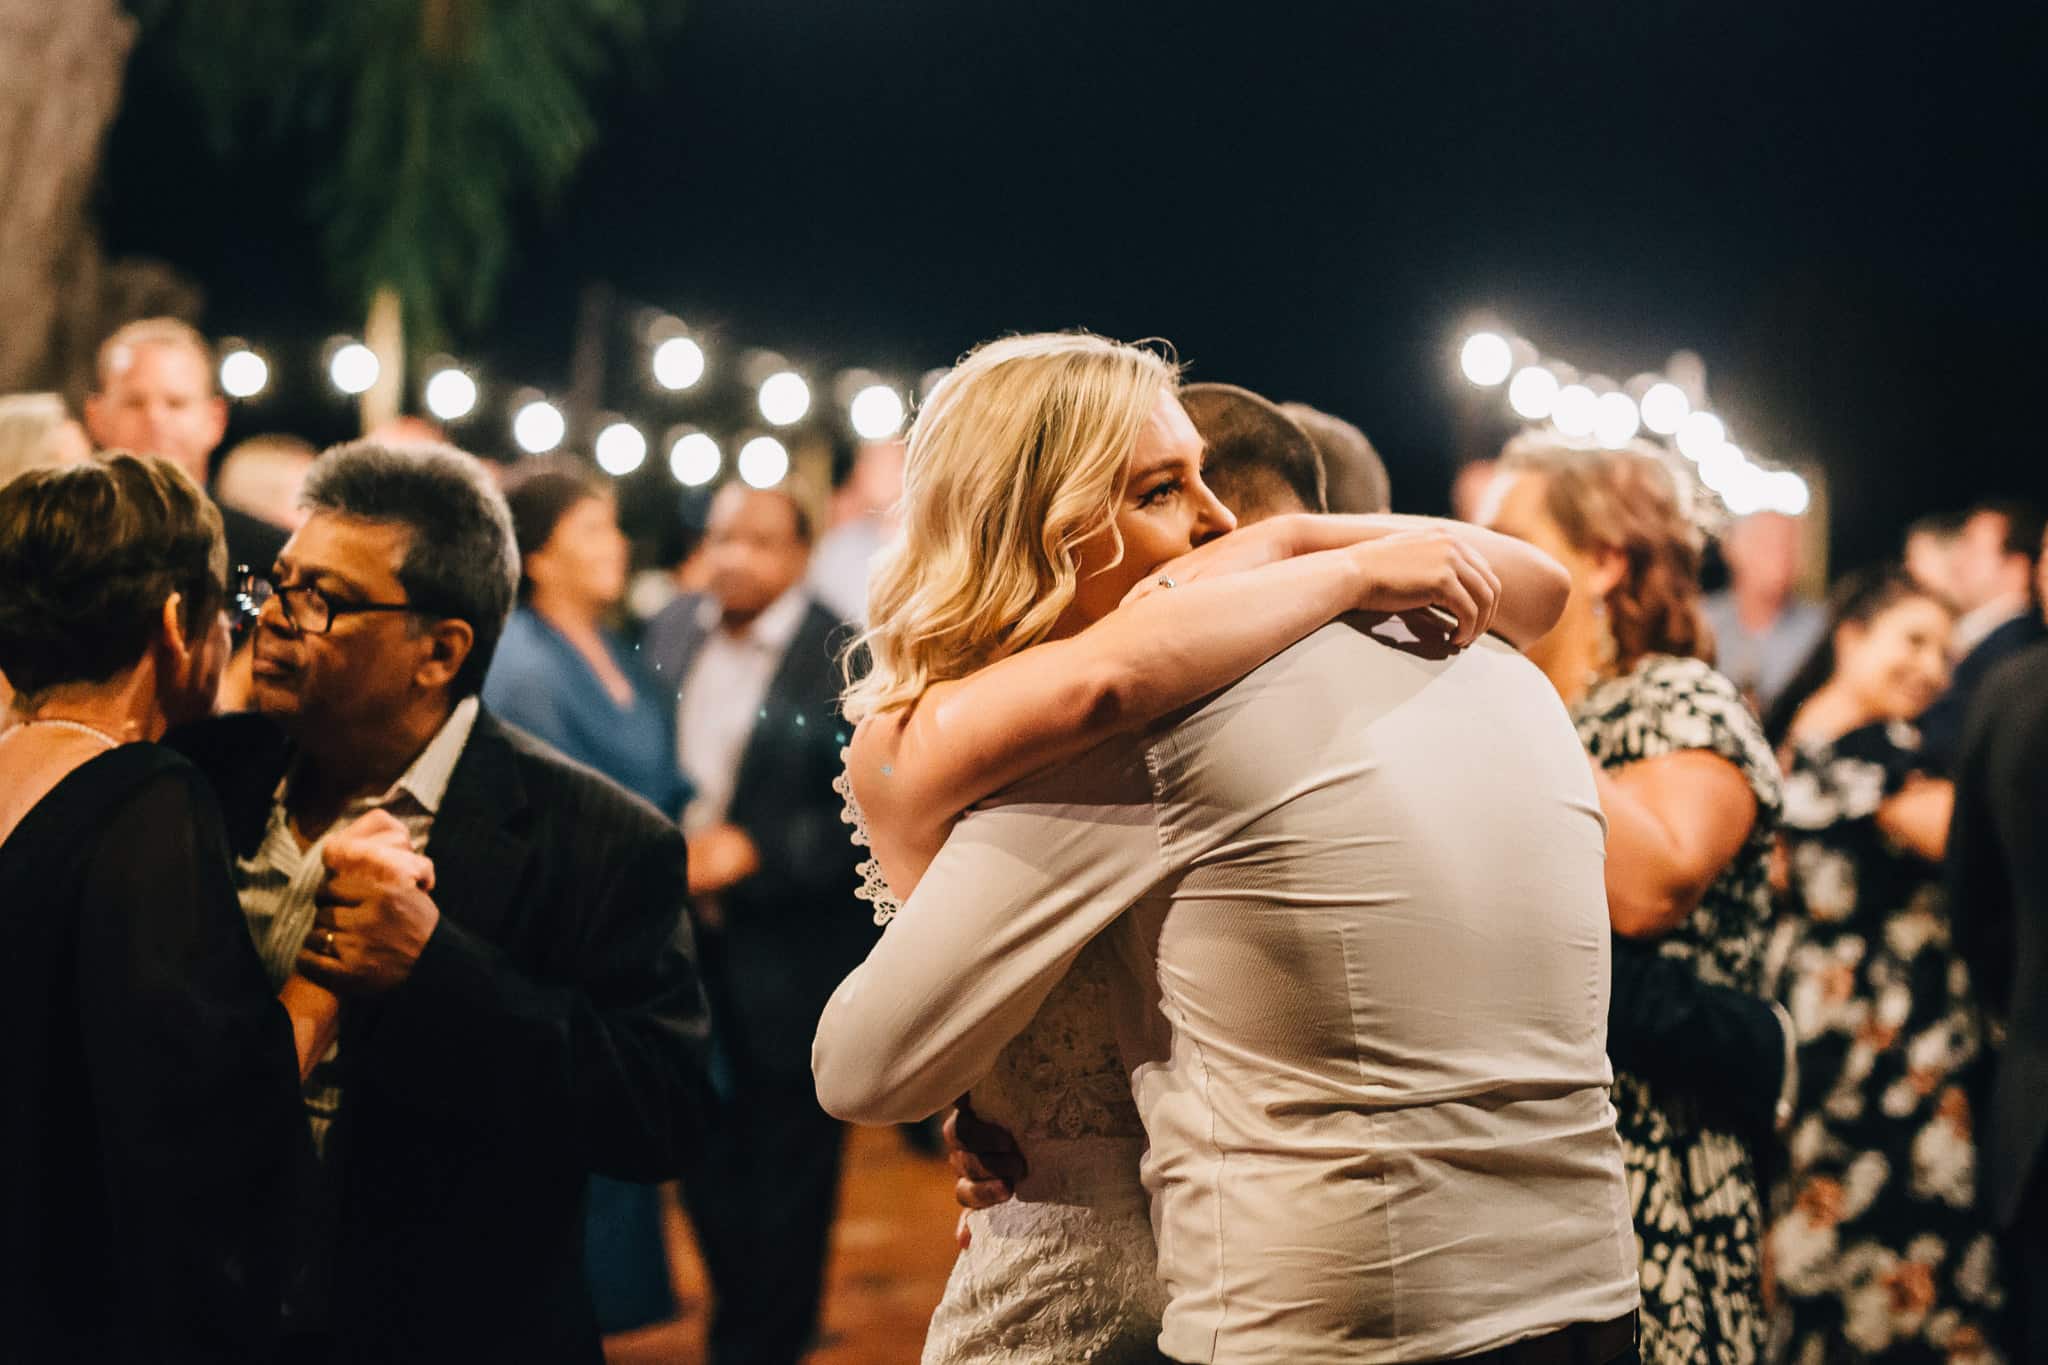 While dancing a bride and groom lovingly hug each other